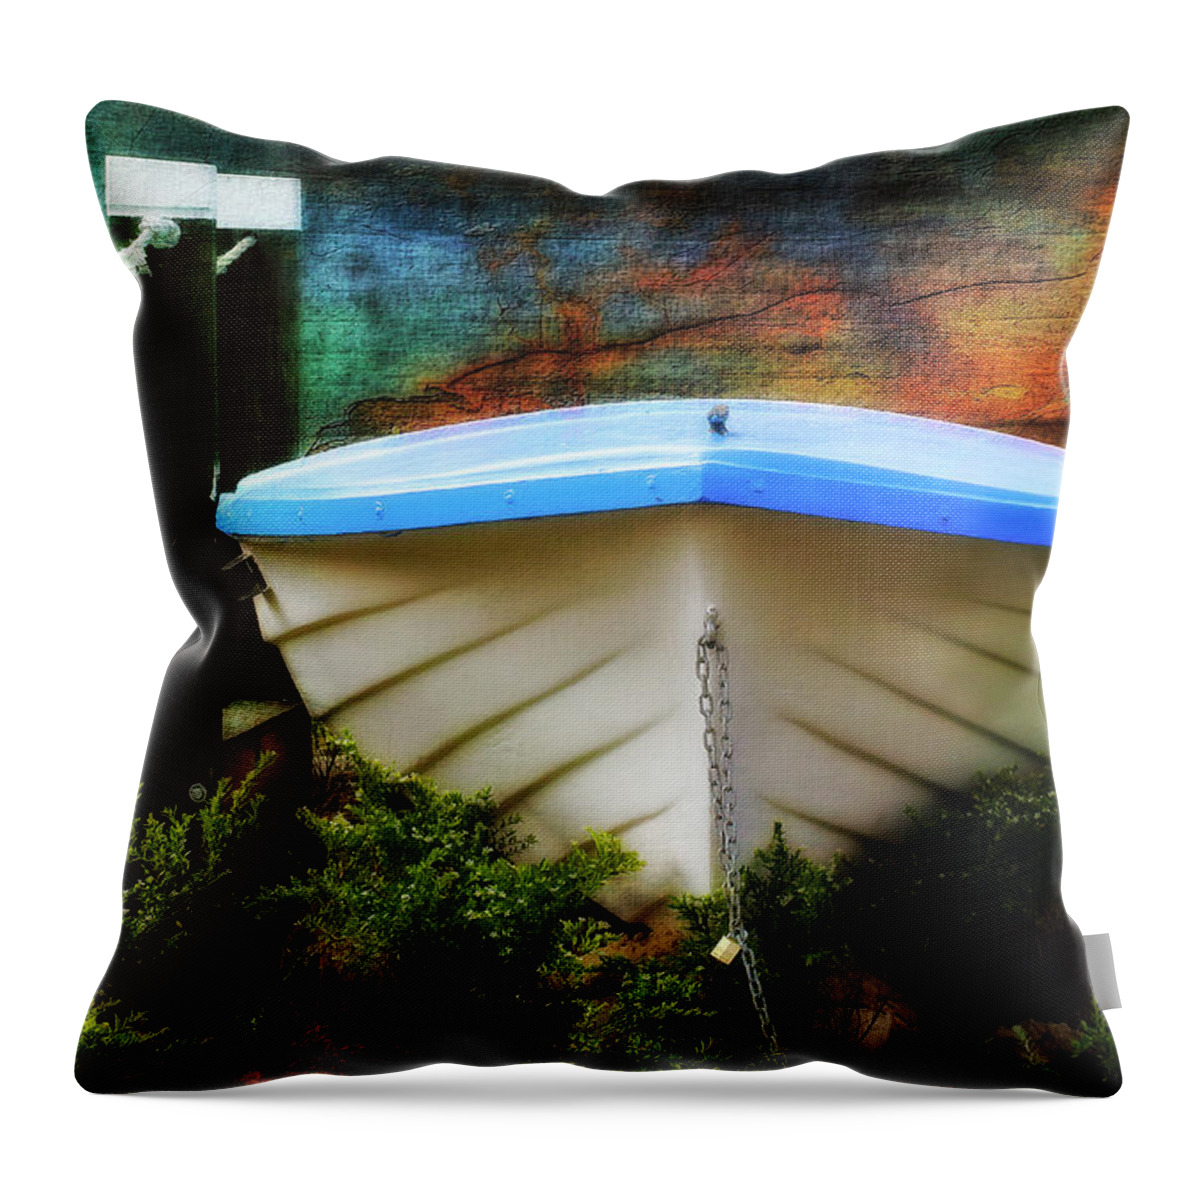 Boats Throw Pillow featuring the photograph No water 01 by Kevin Chippindall